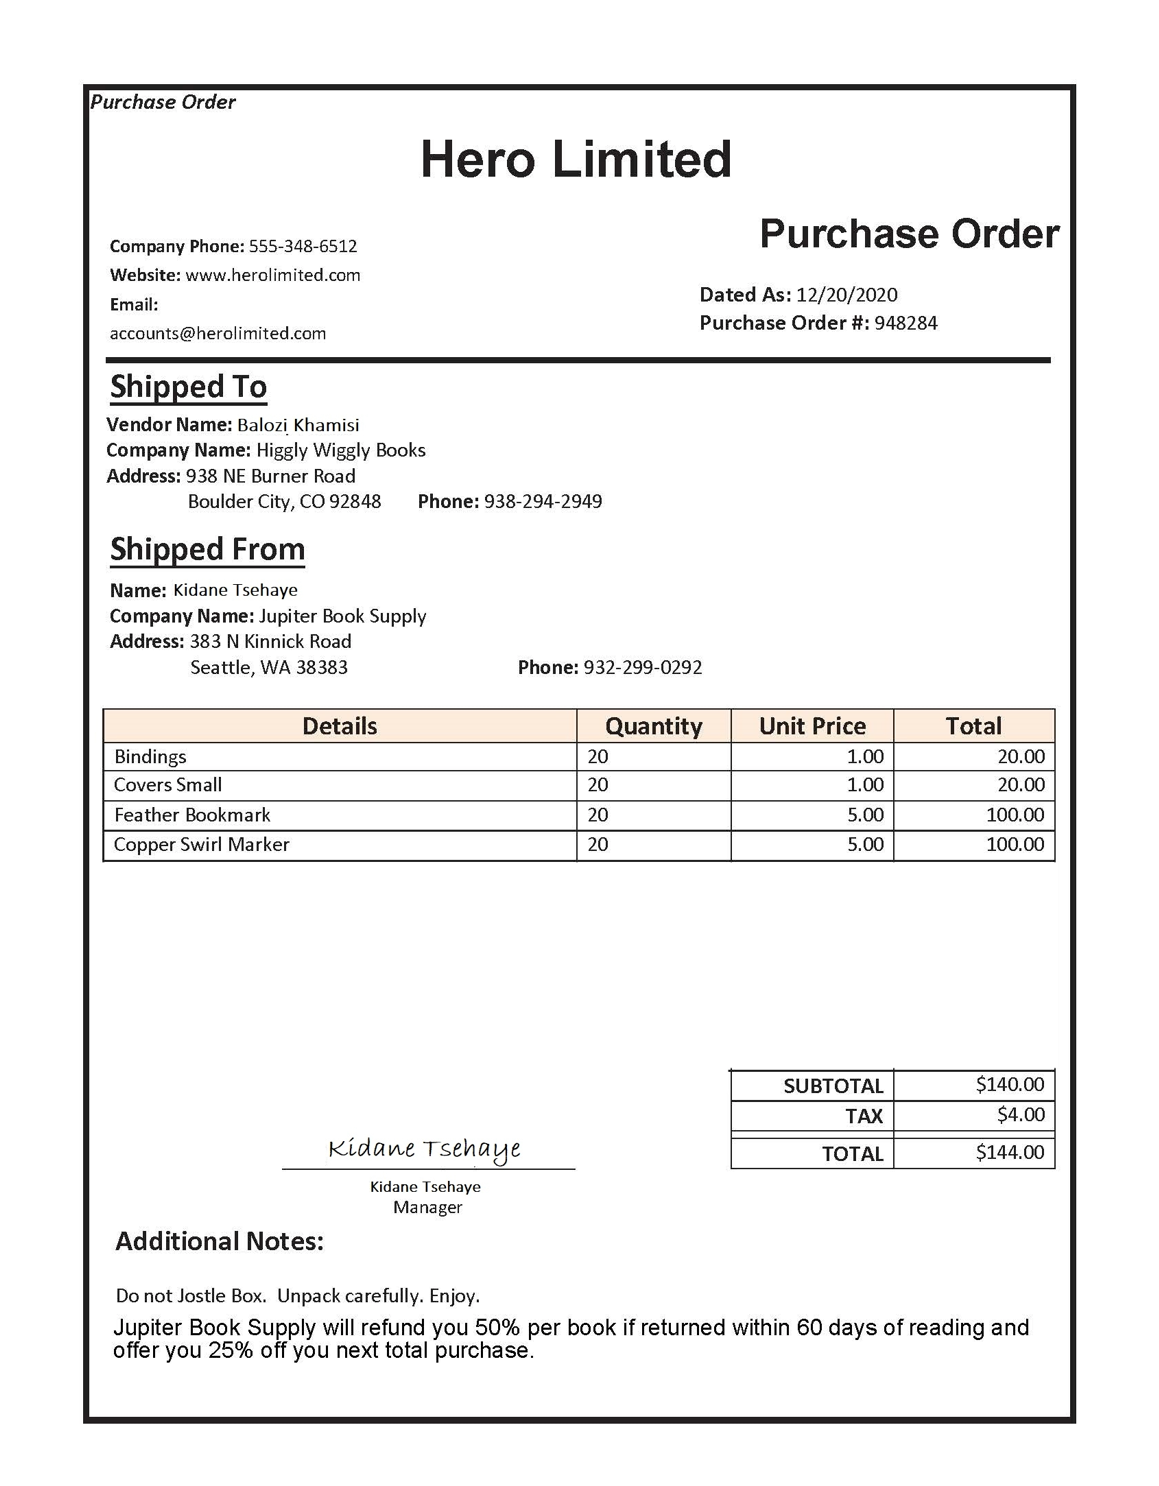 An image of an invoice.